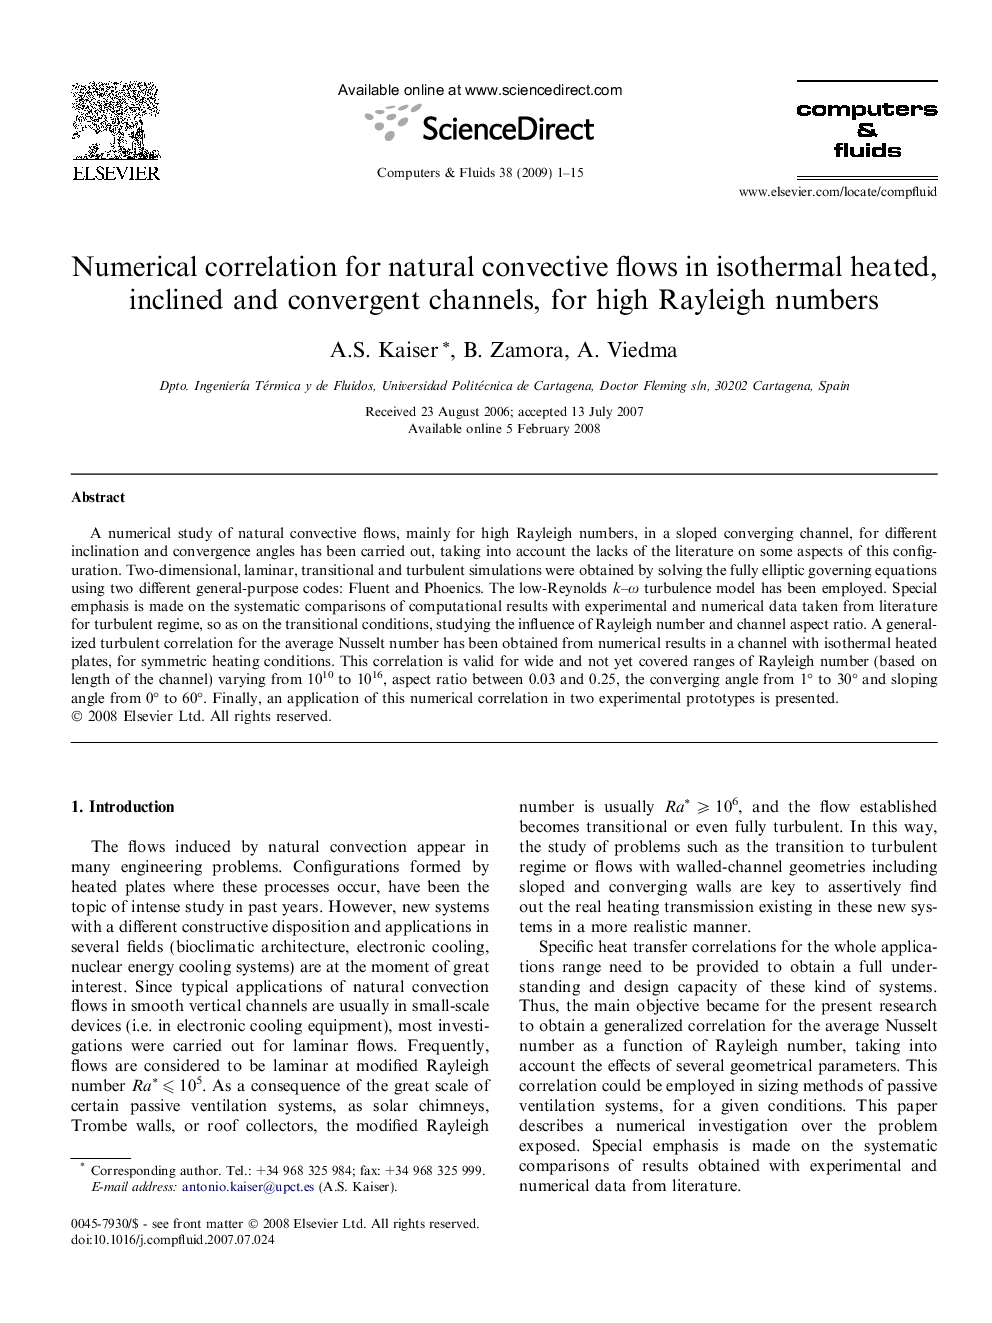 Numerical correlation for natural convective flows in isothermal heated, inclined and convergent channels, for high Rayleigh numbers